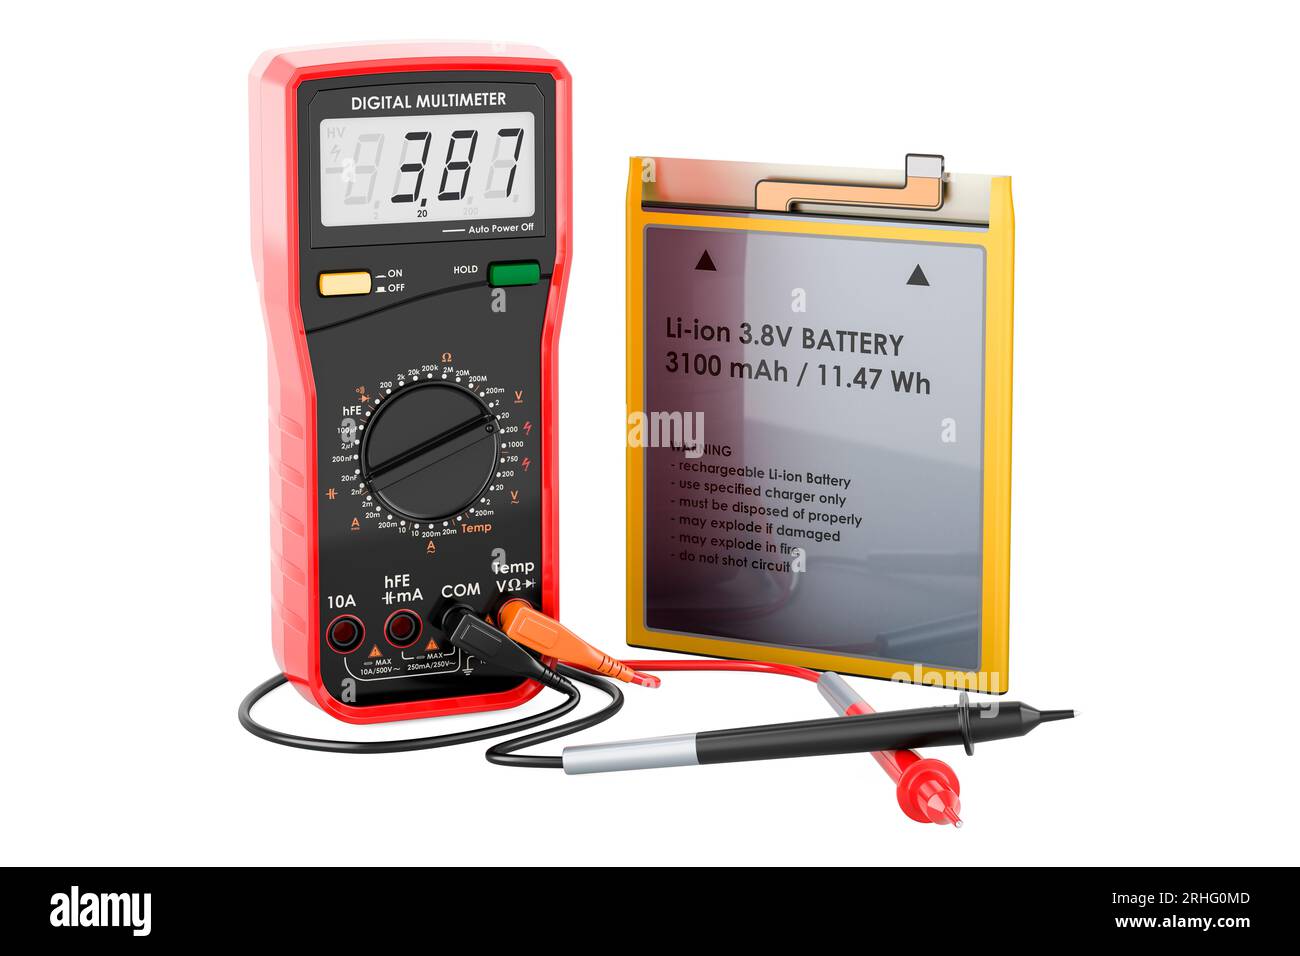 https://c8.alamy.com/comp/2RHG0MD/digital-multimeter-and-lithium-ion-cell-phone-battery-3d-rendering-isolated-on-white-background-2RHG0MD.jpg